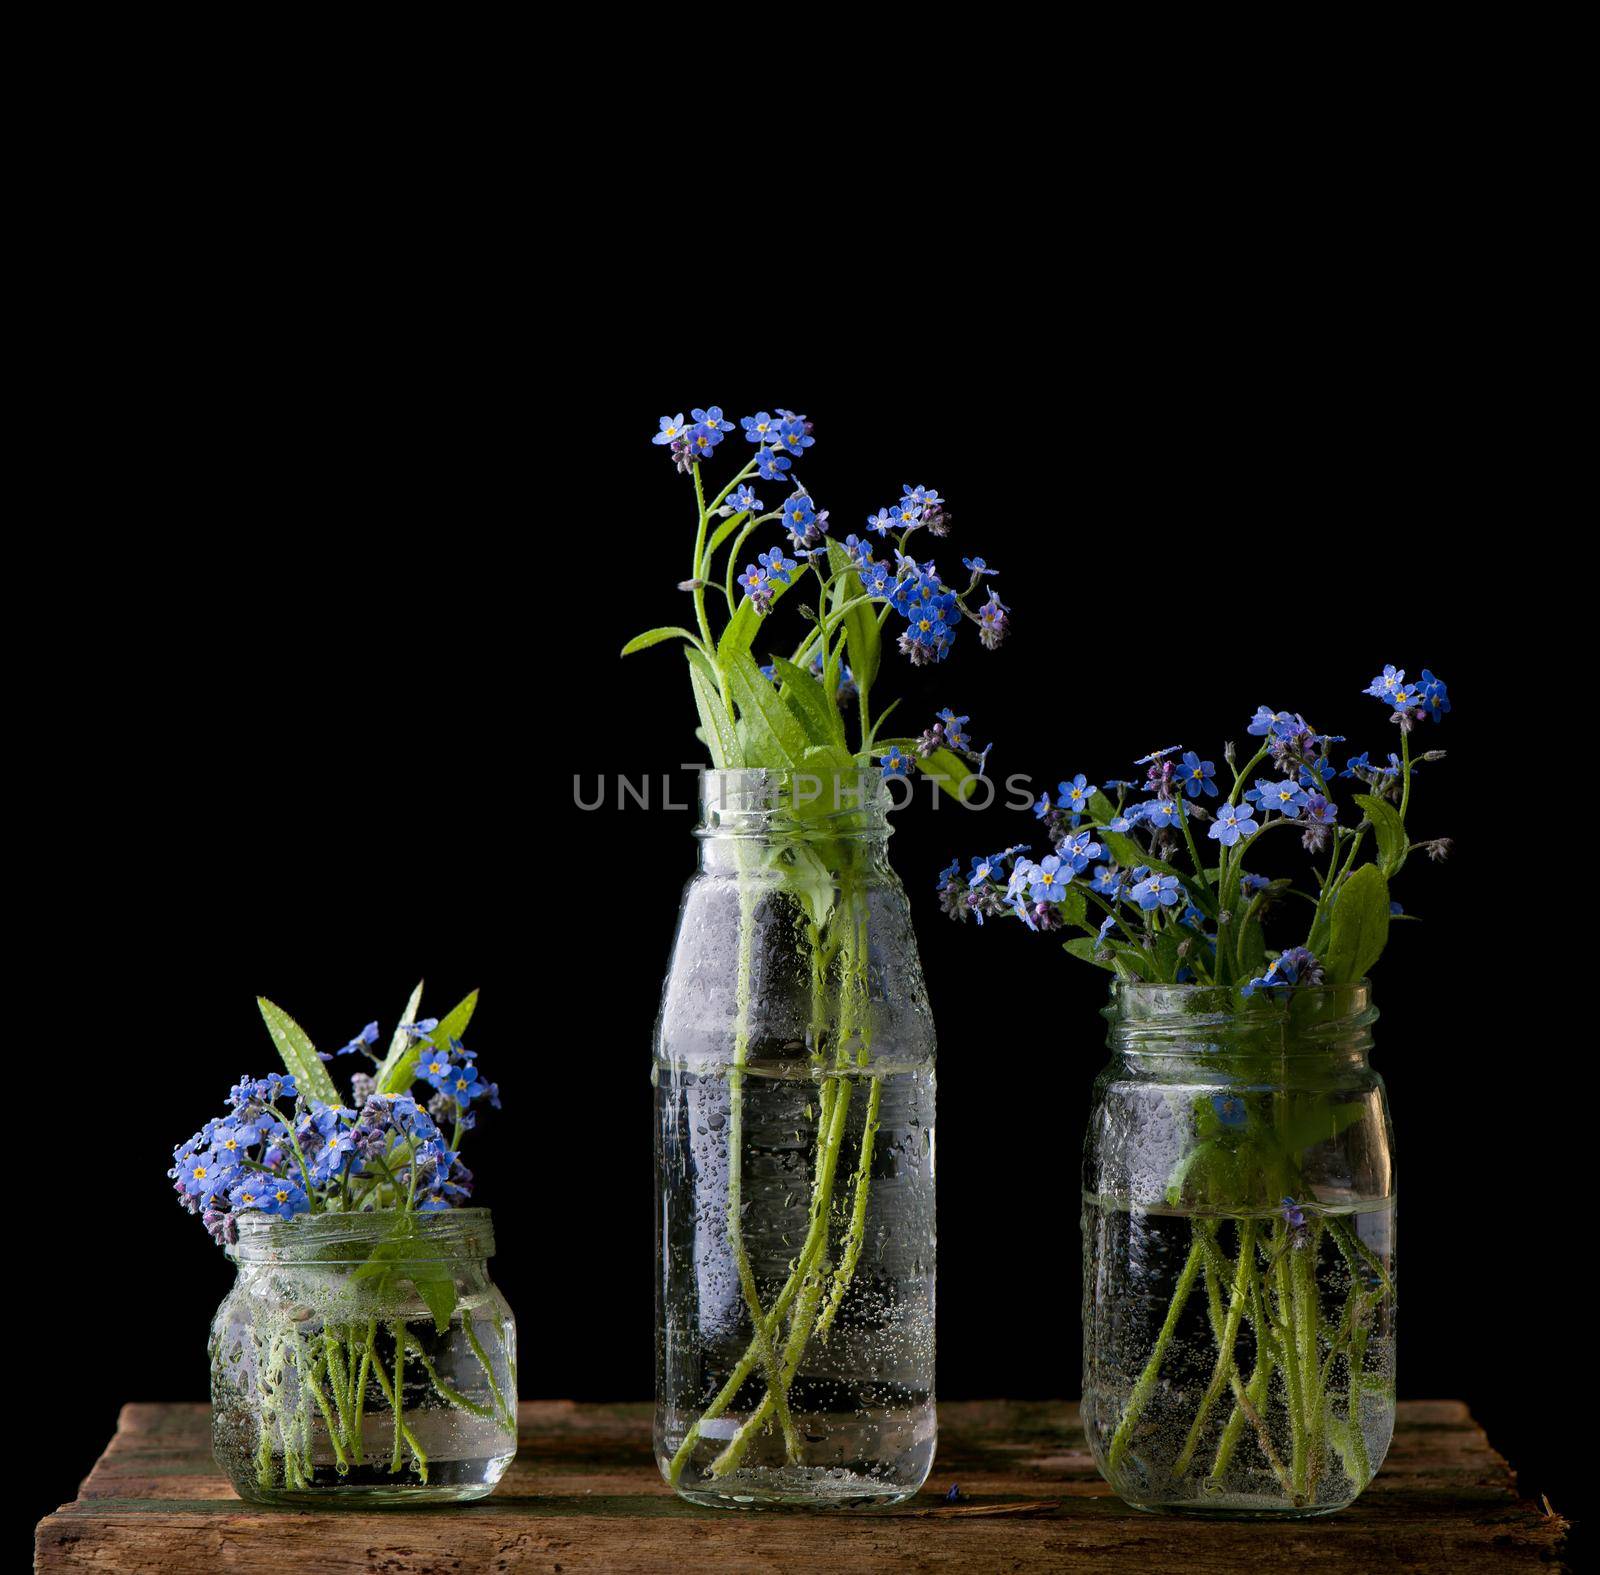 Blue forget-me-nots on a wooden table